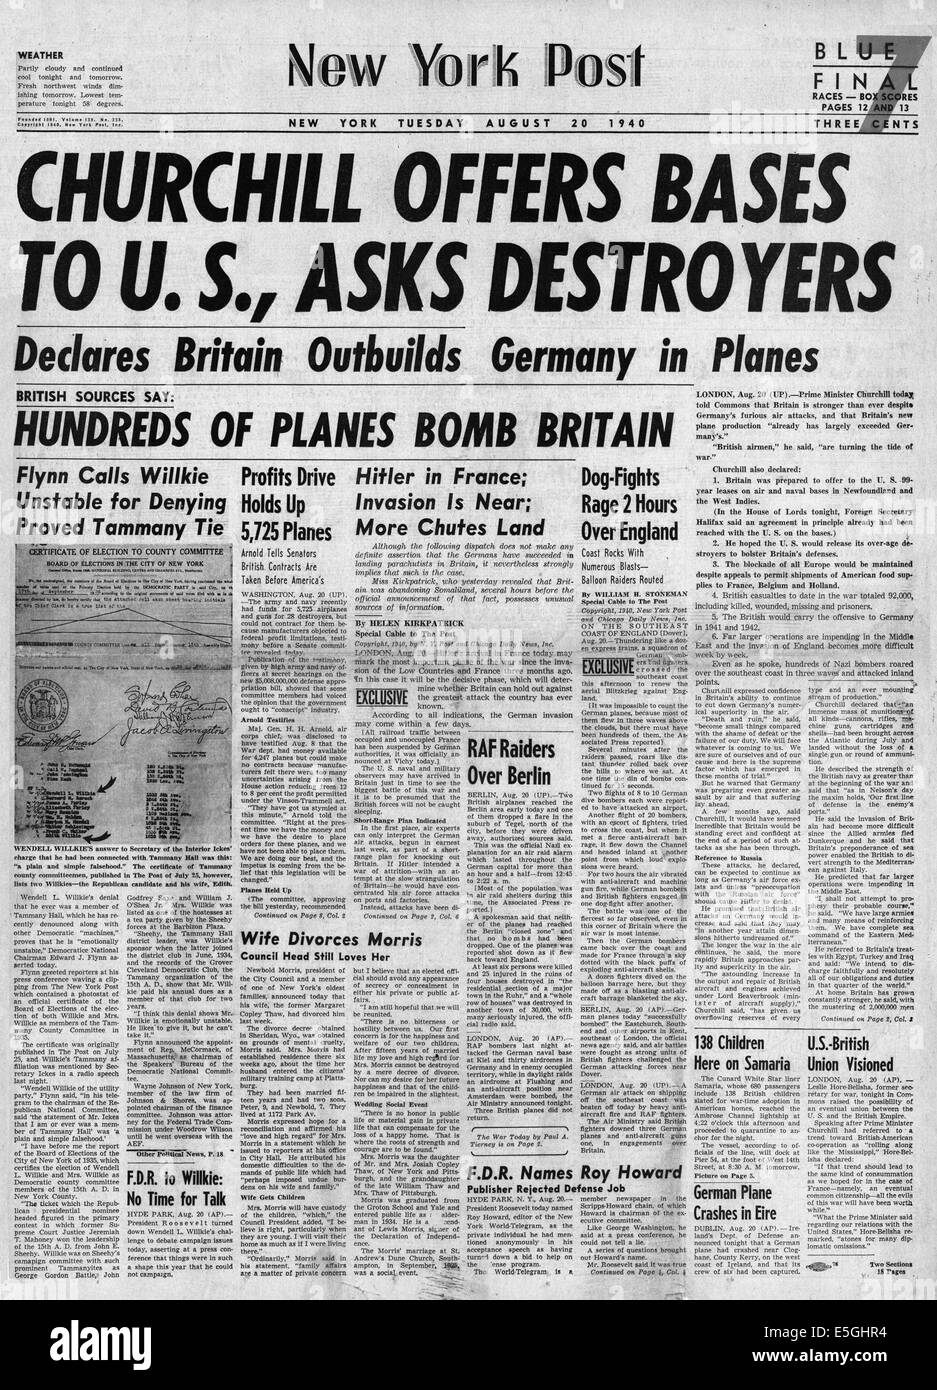 1940 New York Post front page reporting Winston Churchill offers the United States British Air and Naval bases in Newfoundland and West Indies in return for U.S. destroyers Stock Photo